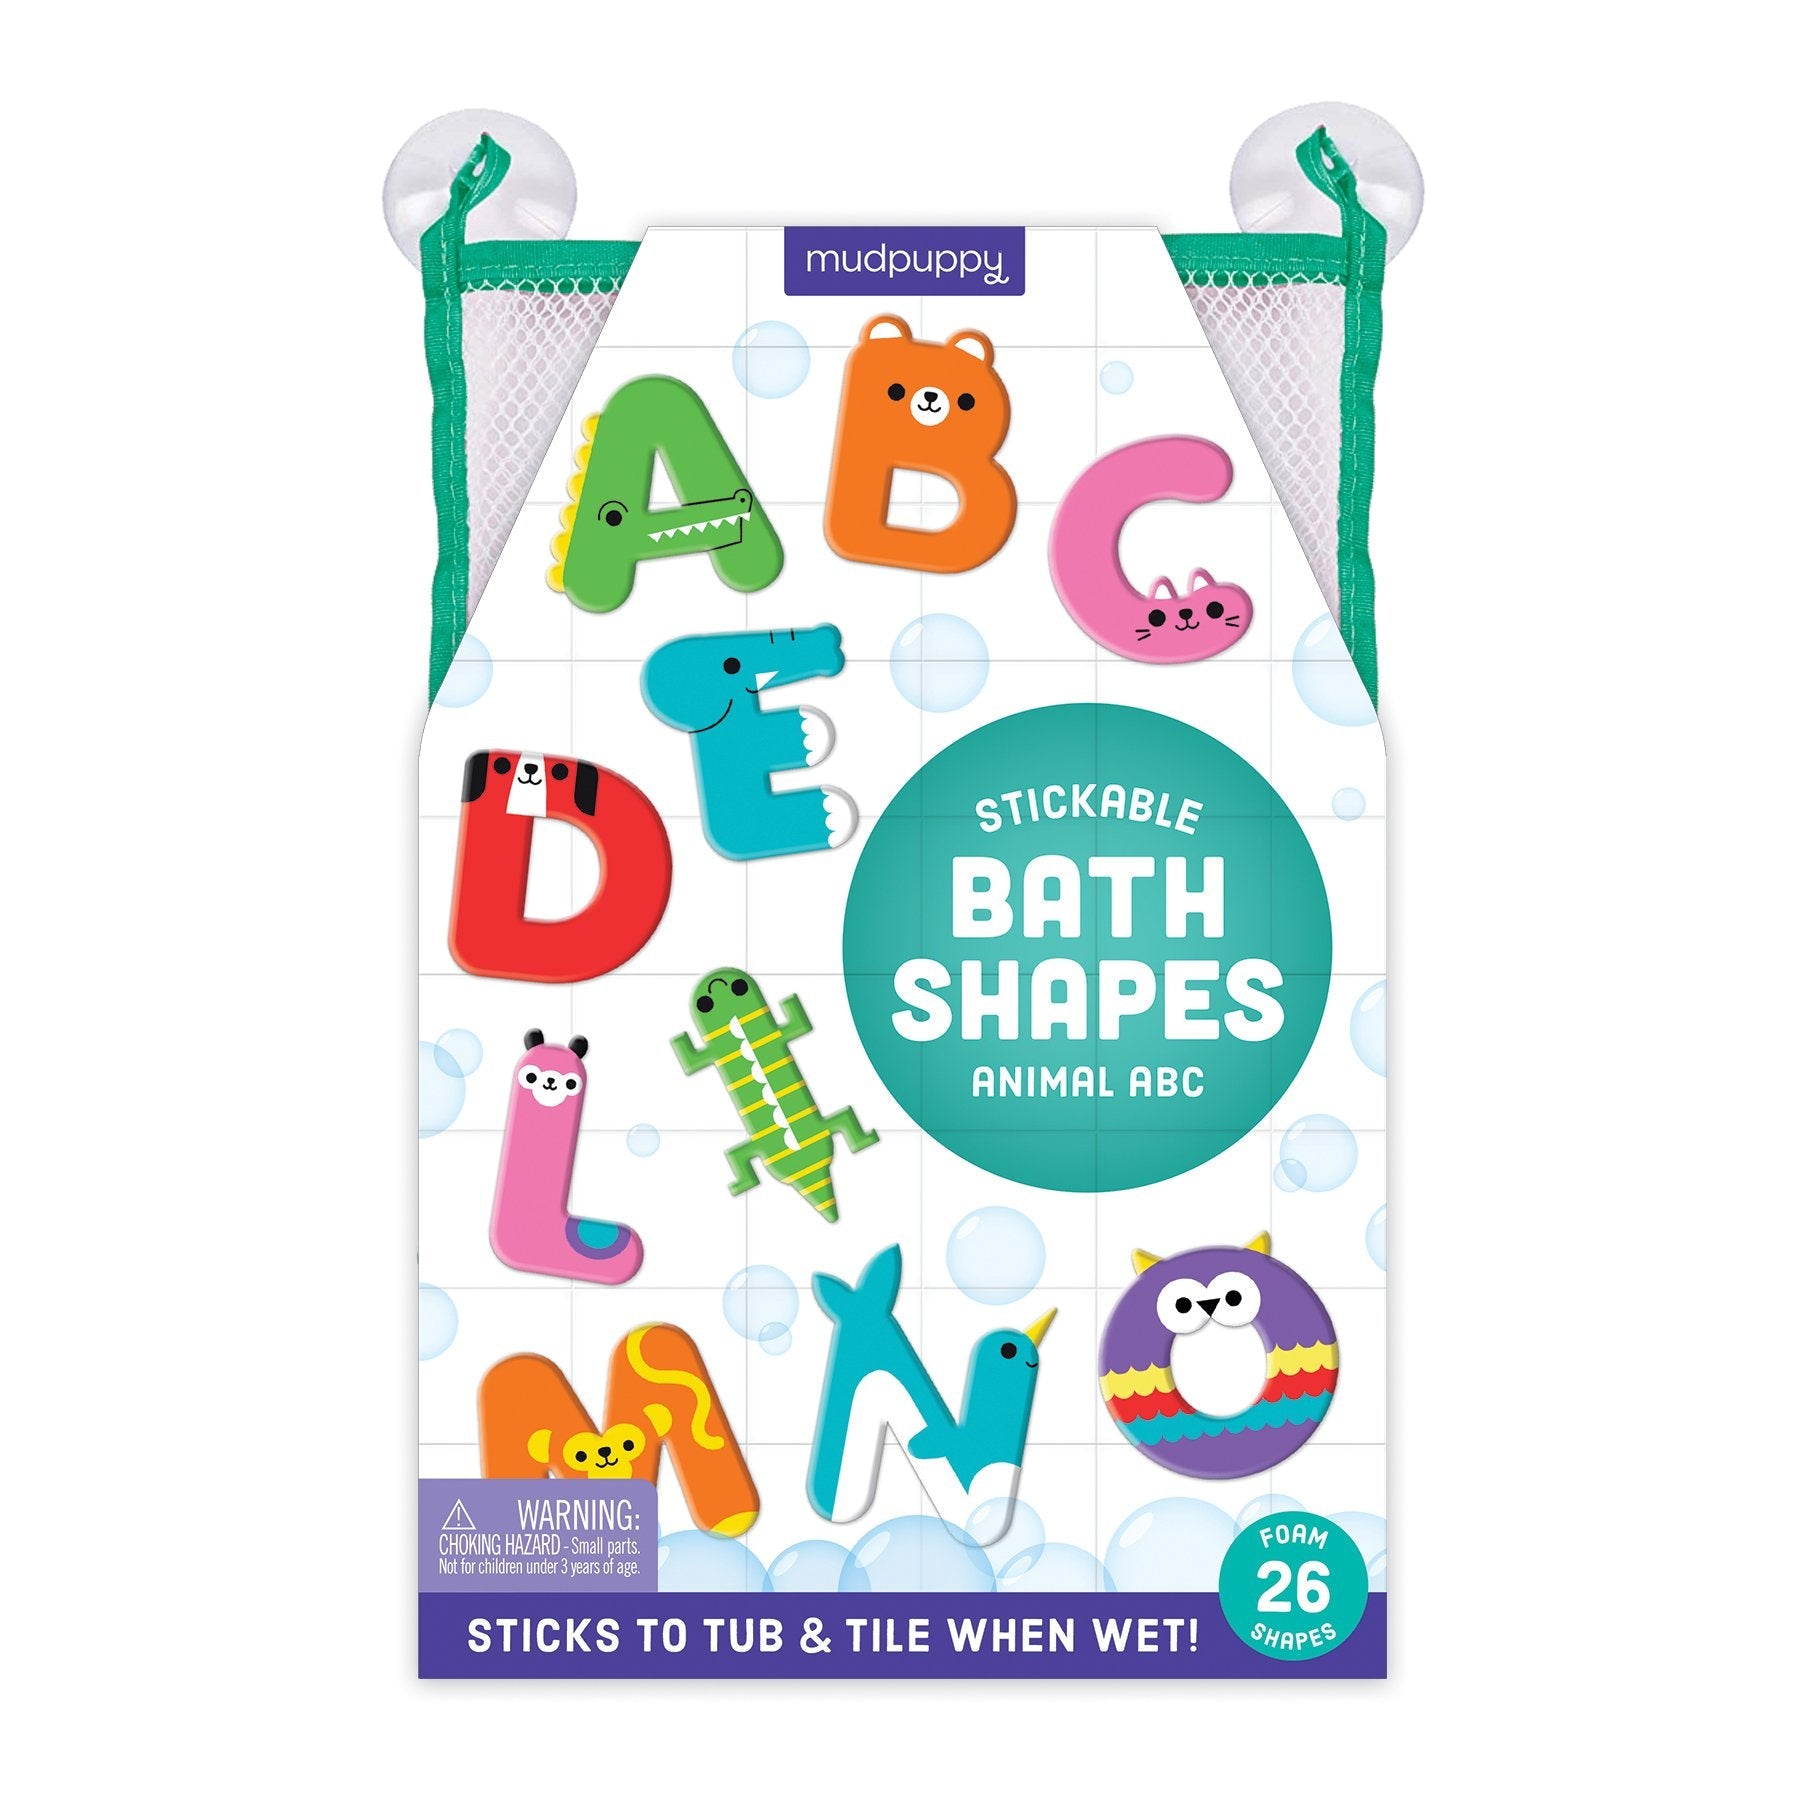 Wholesale Alphabet Letters and Numbers Foam Bath Toys for Kids